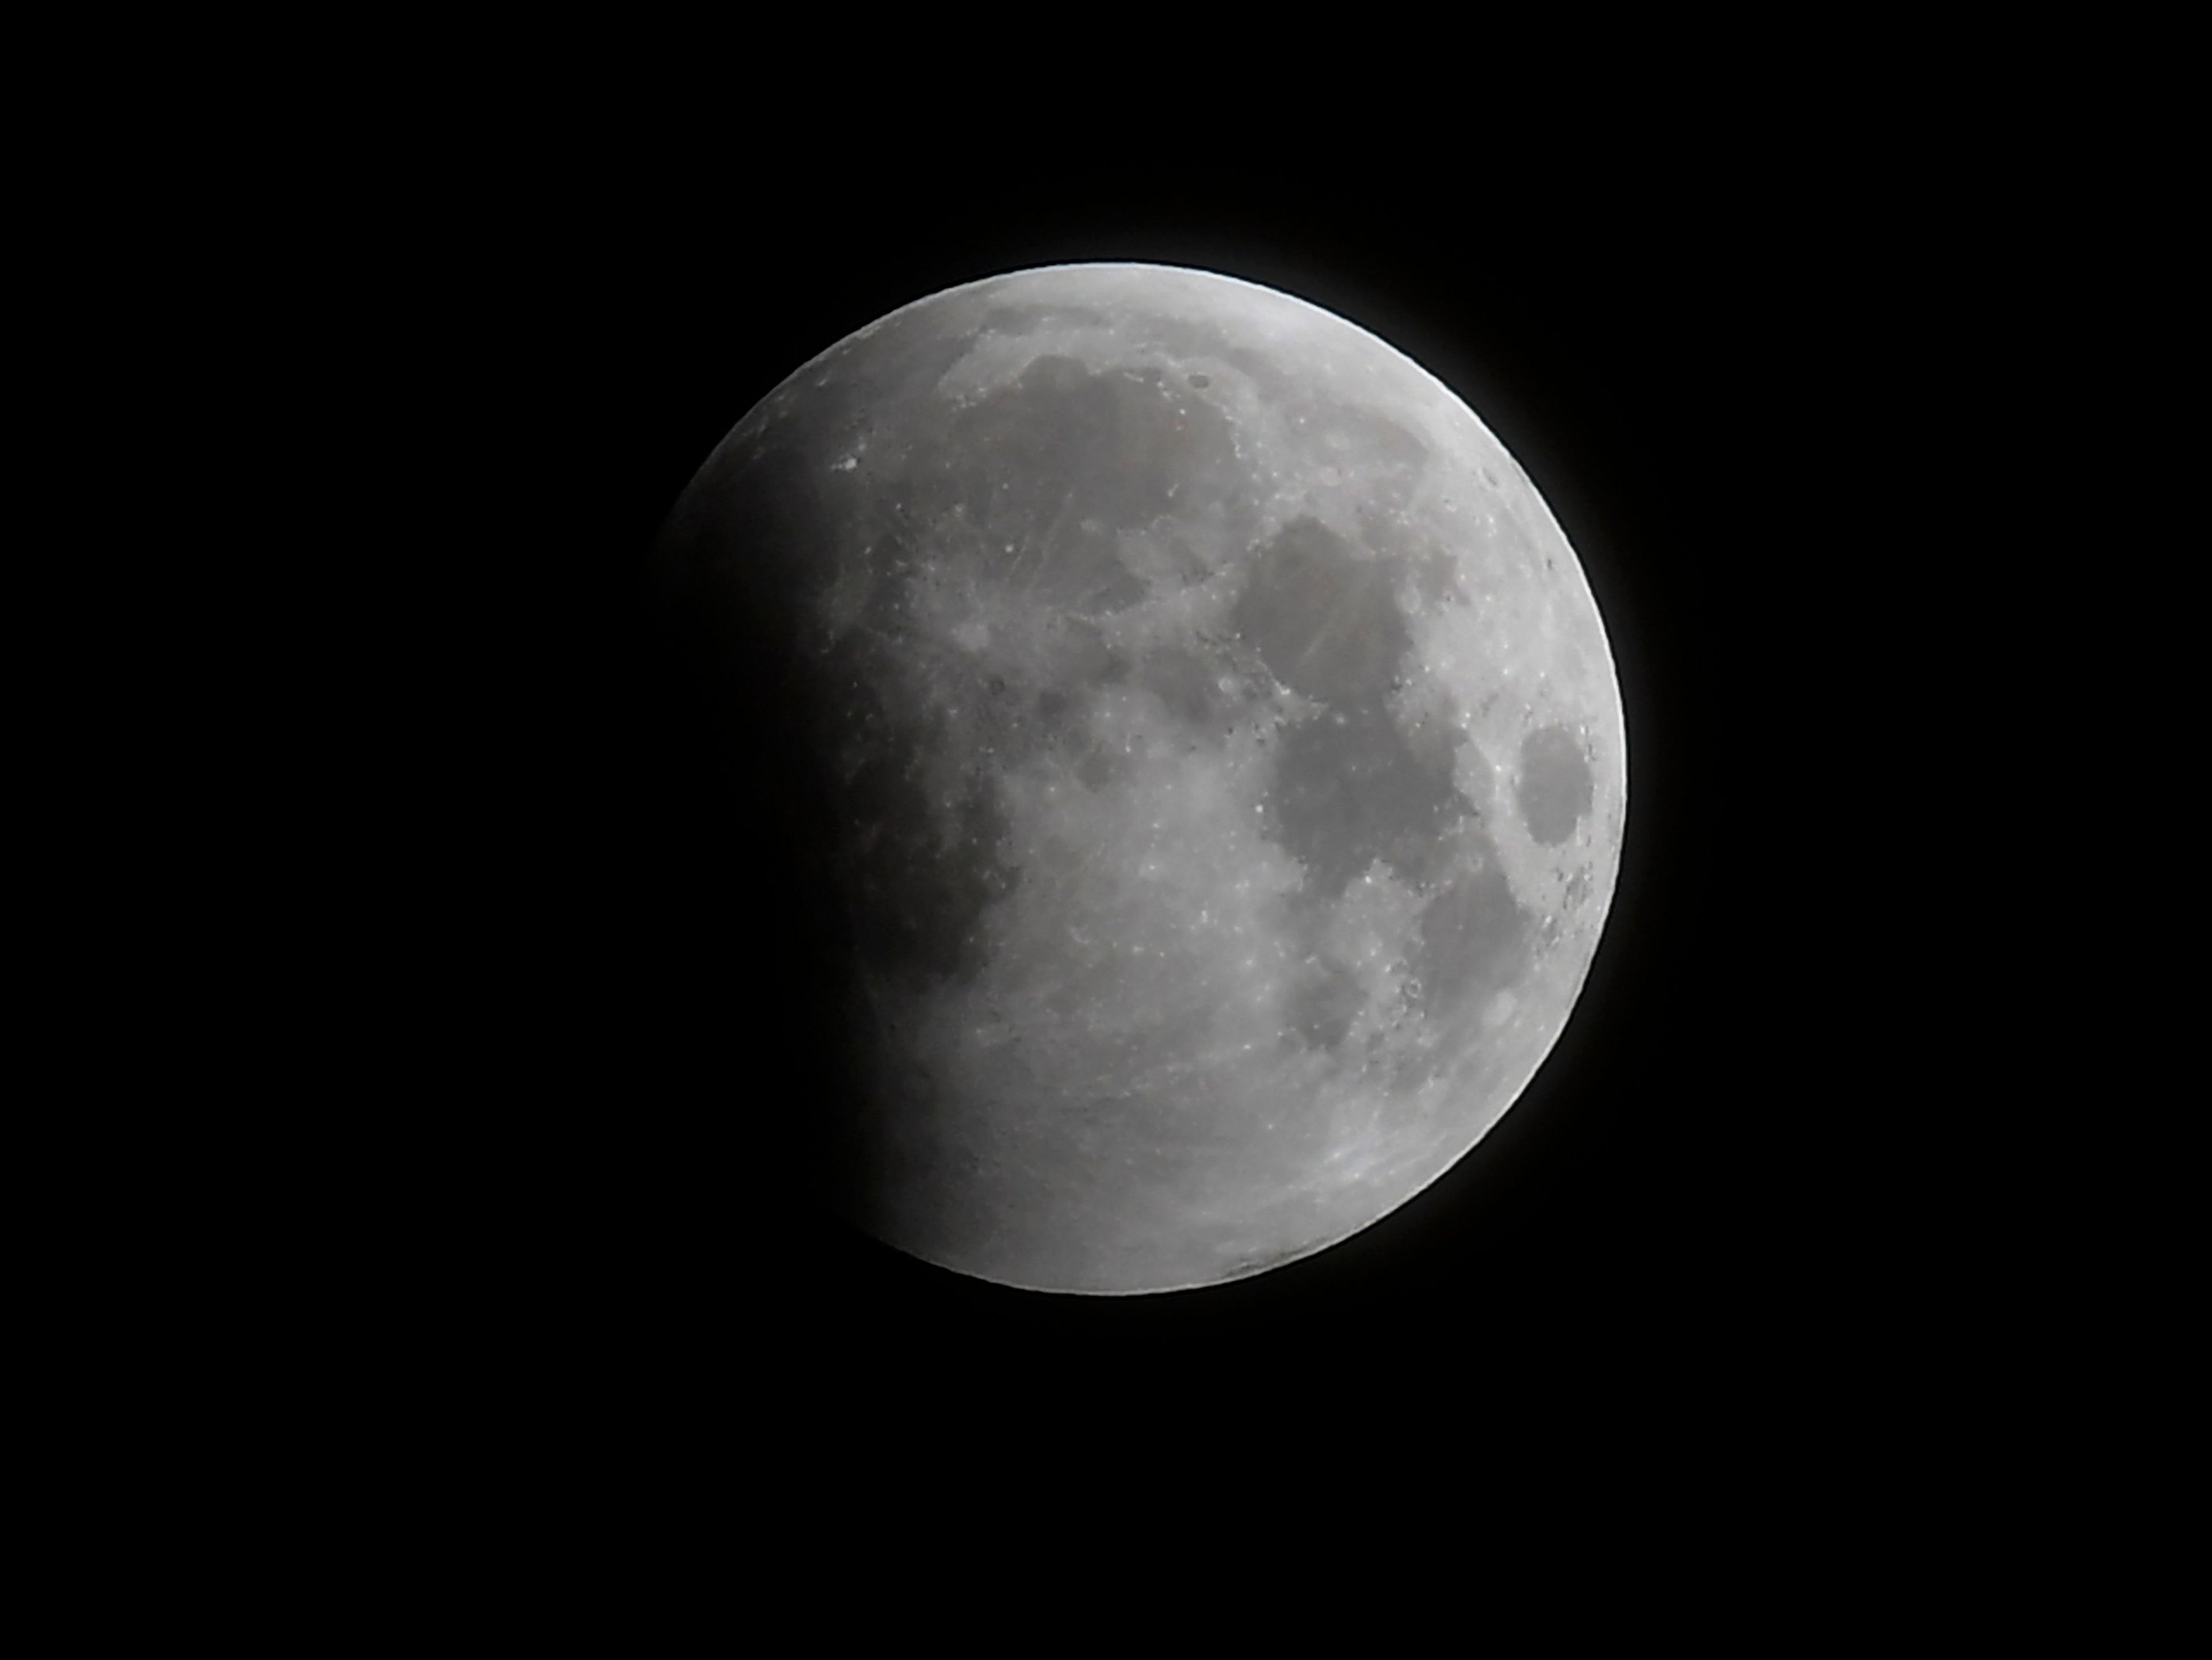 The progression of the eclipse begins with a partial covering of the moon as seen in Santa Monica, California, on Wednesday 26 May 2021